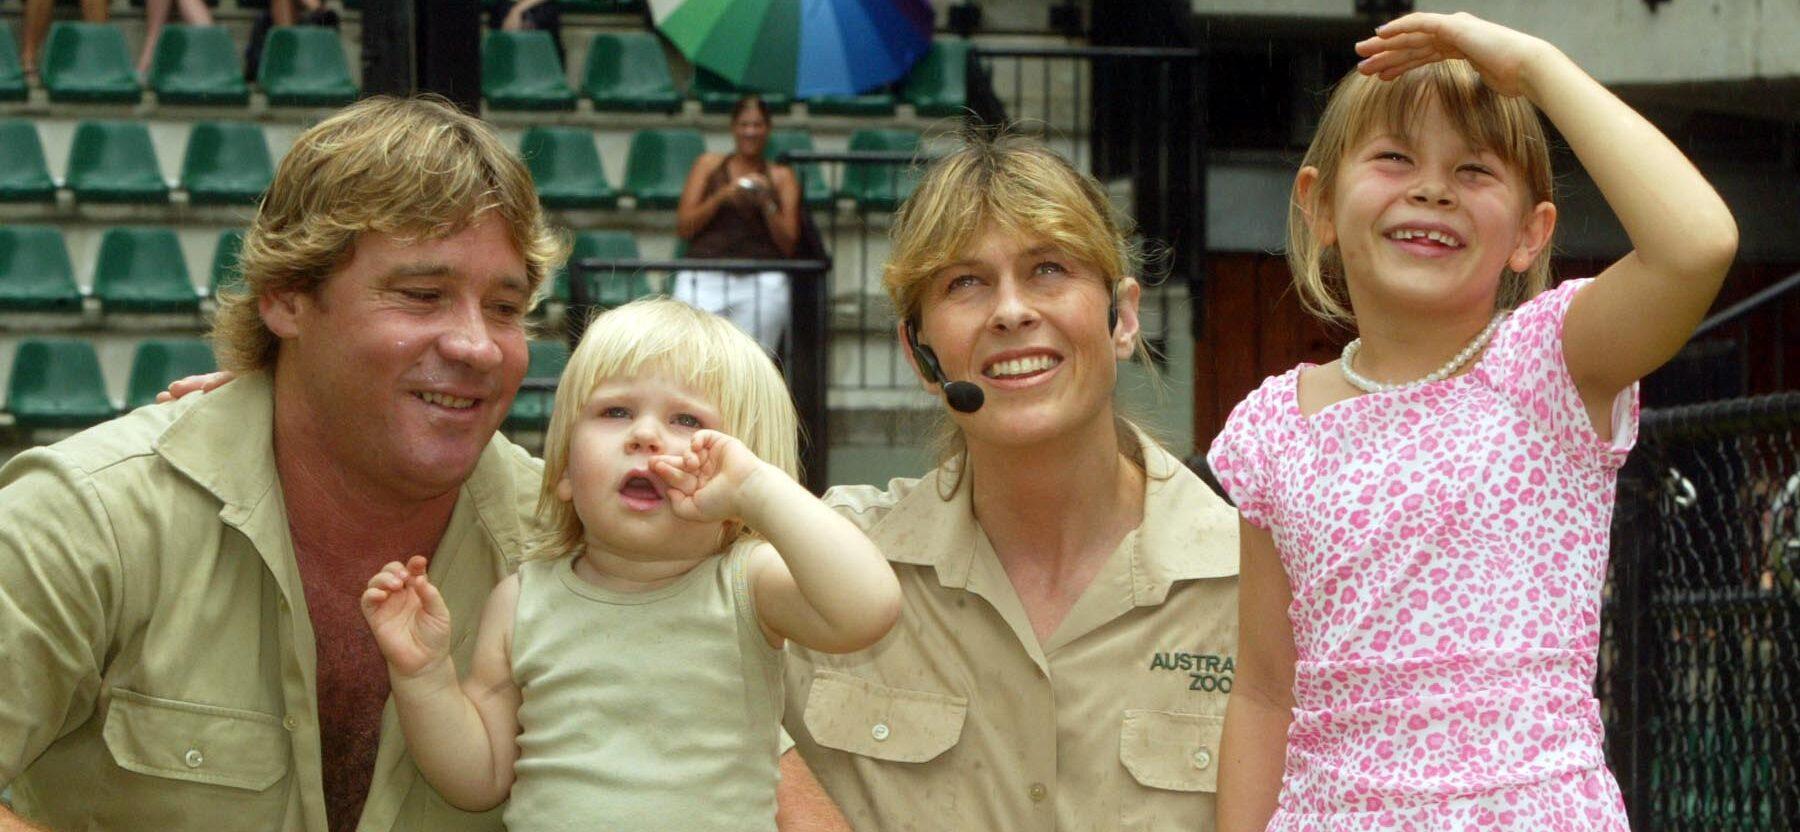 Steve Irwin and Family